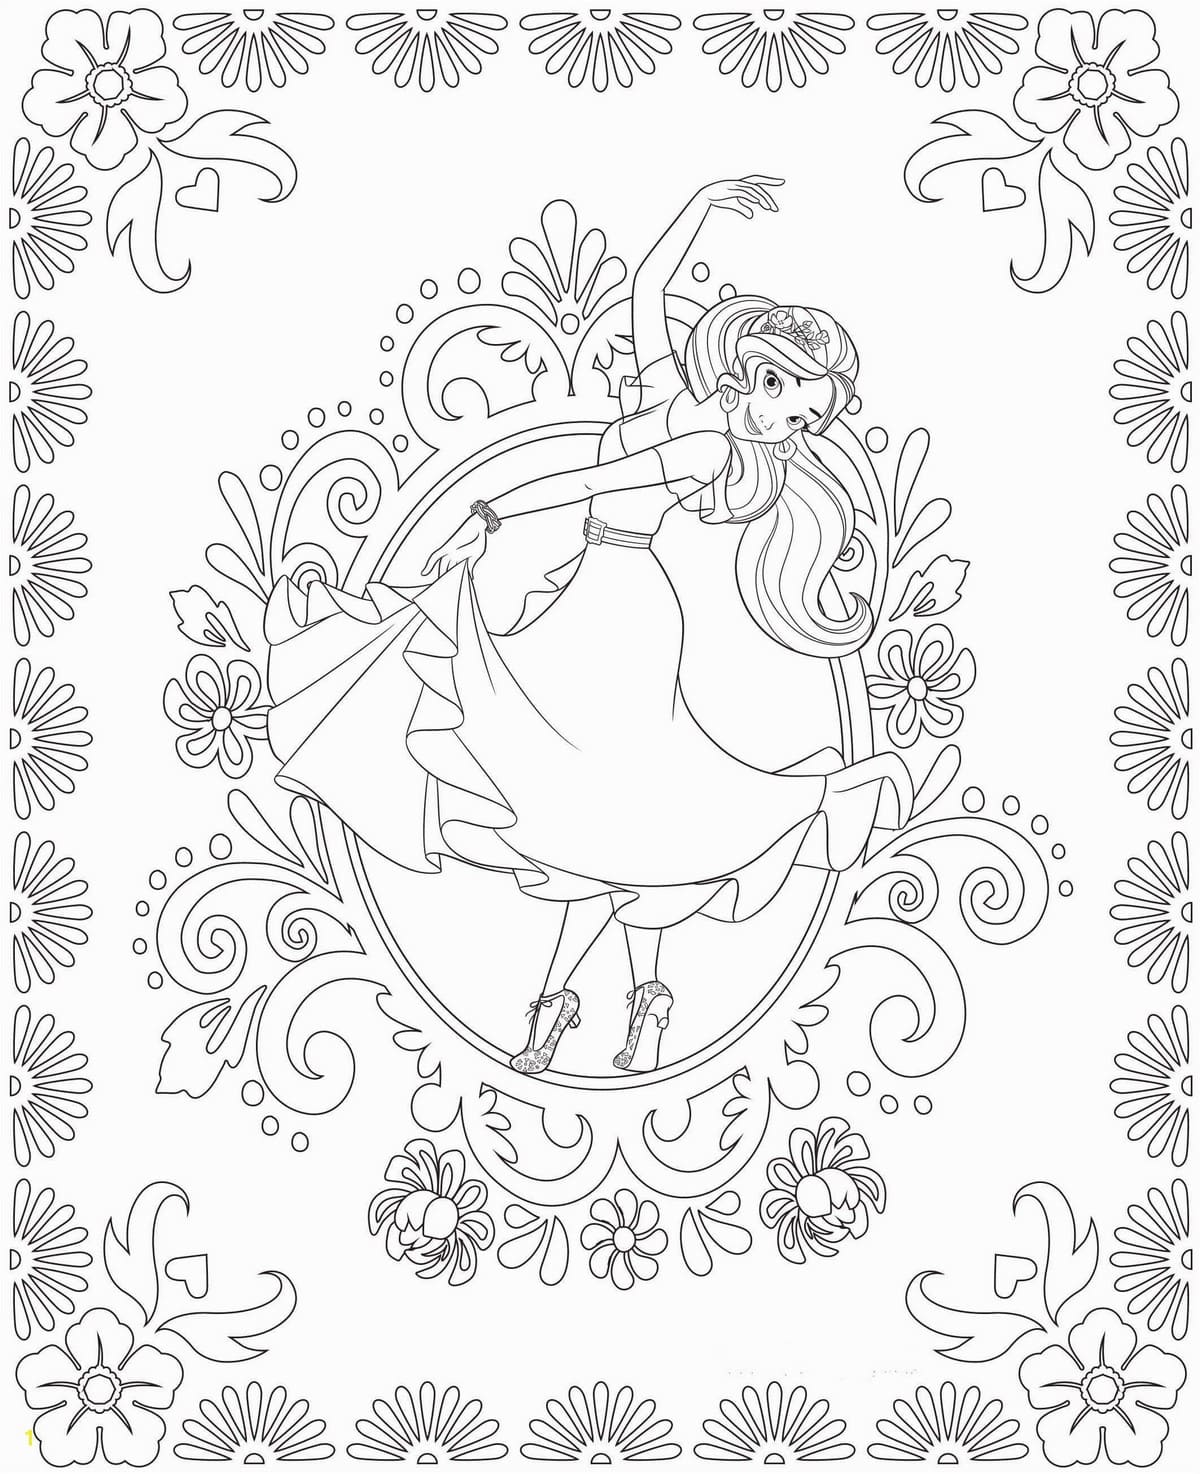 Elena of Avalor Coloring pages   Free Coloring pages for kids